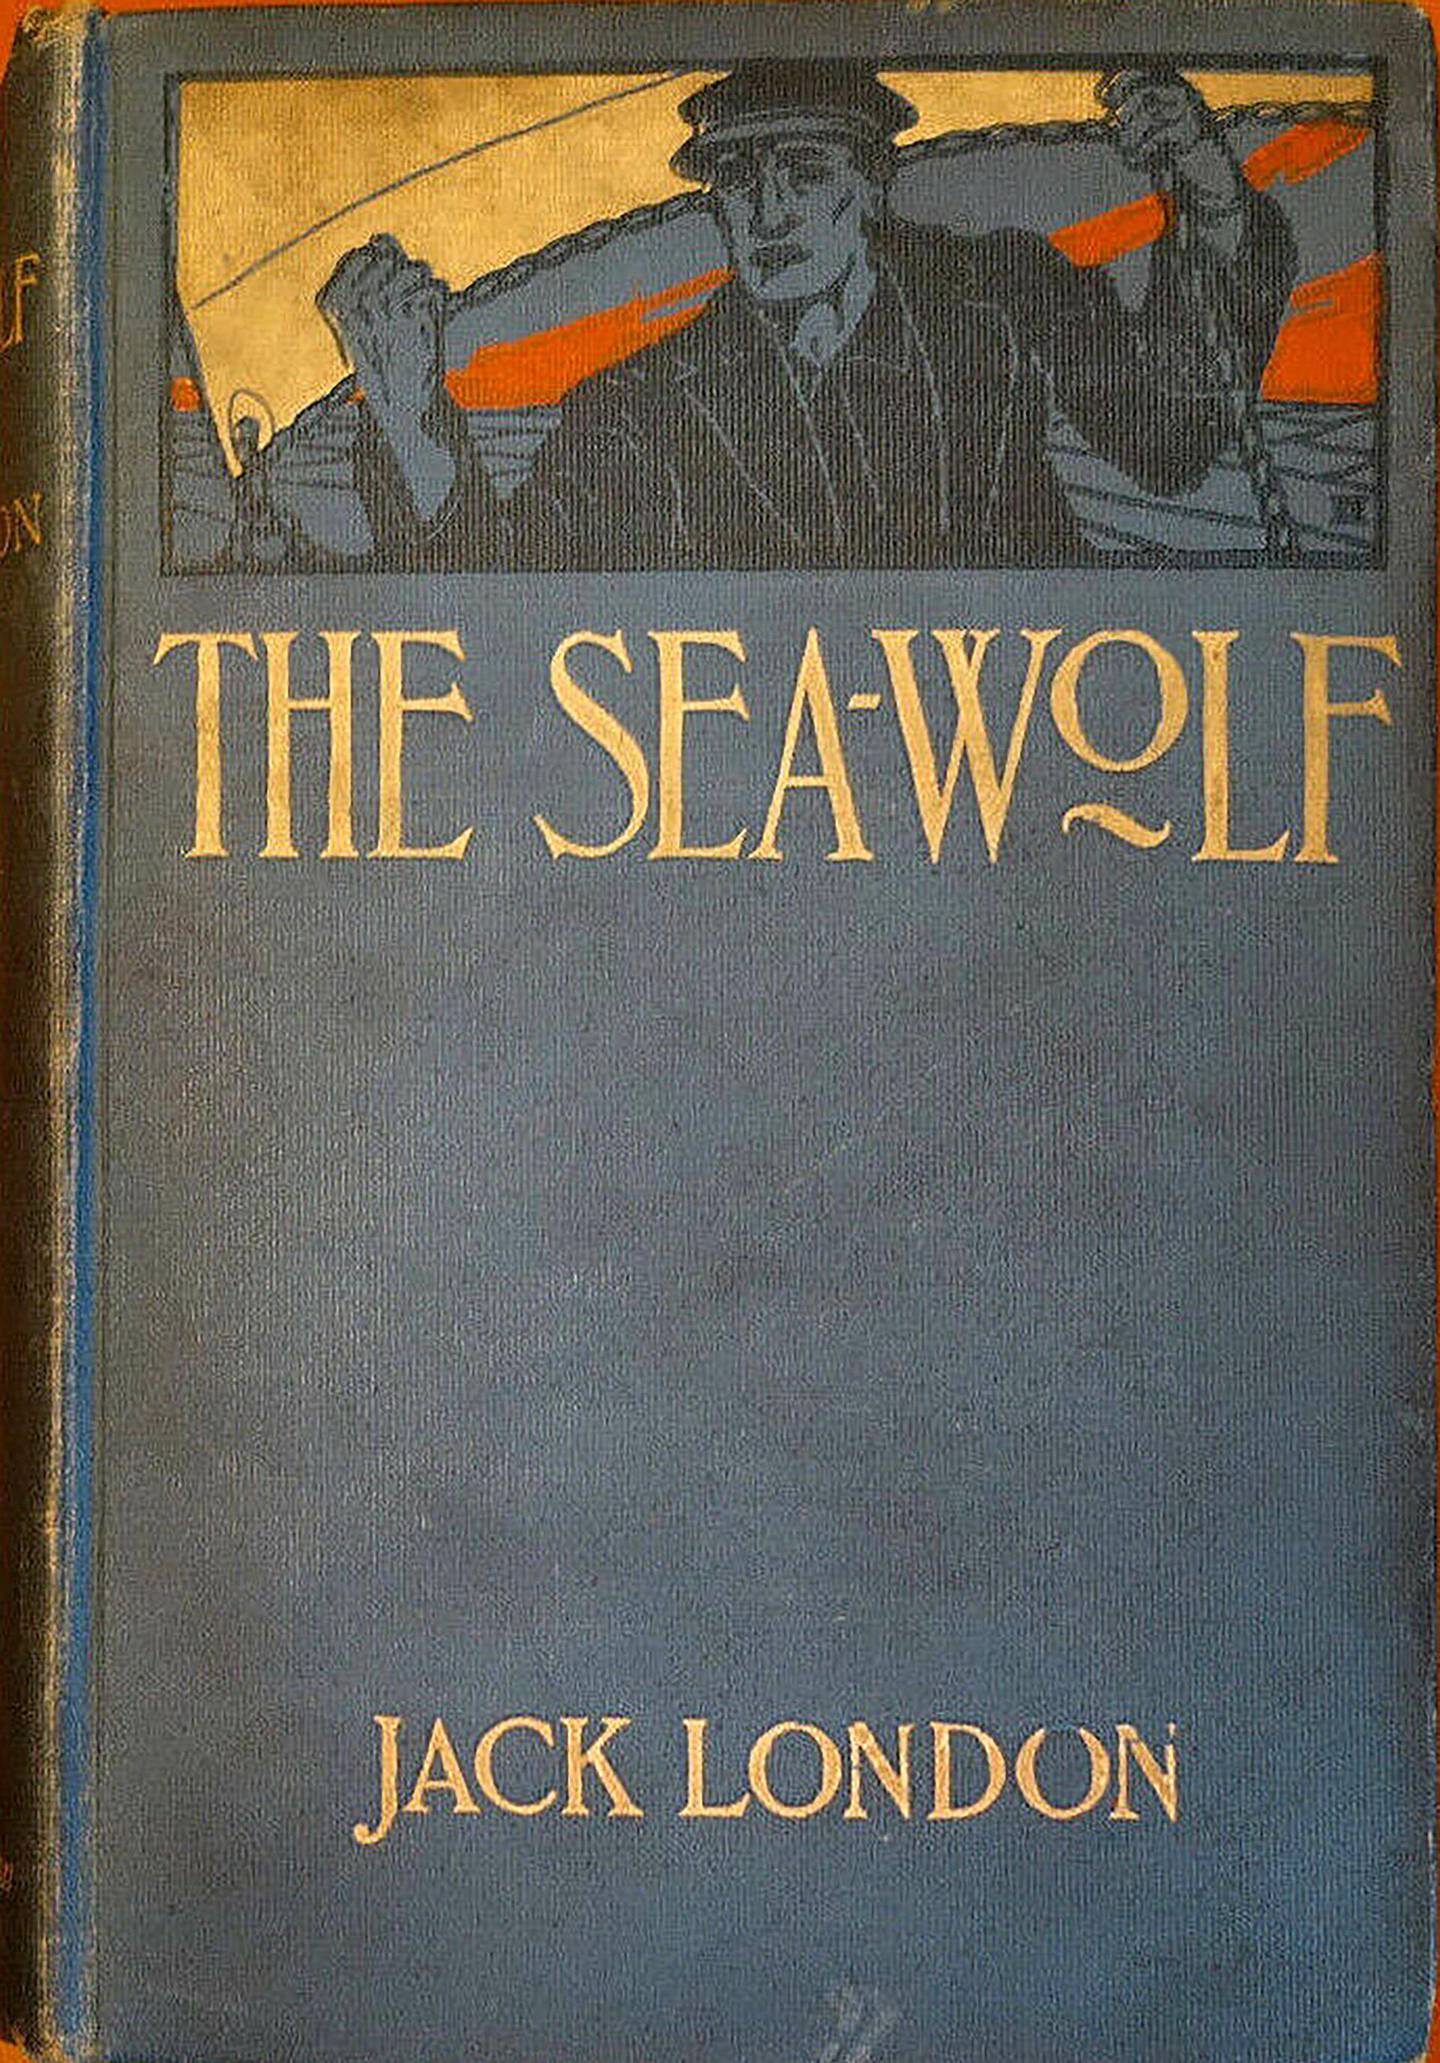 The Sea Wolf by Jack London (1904)